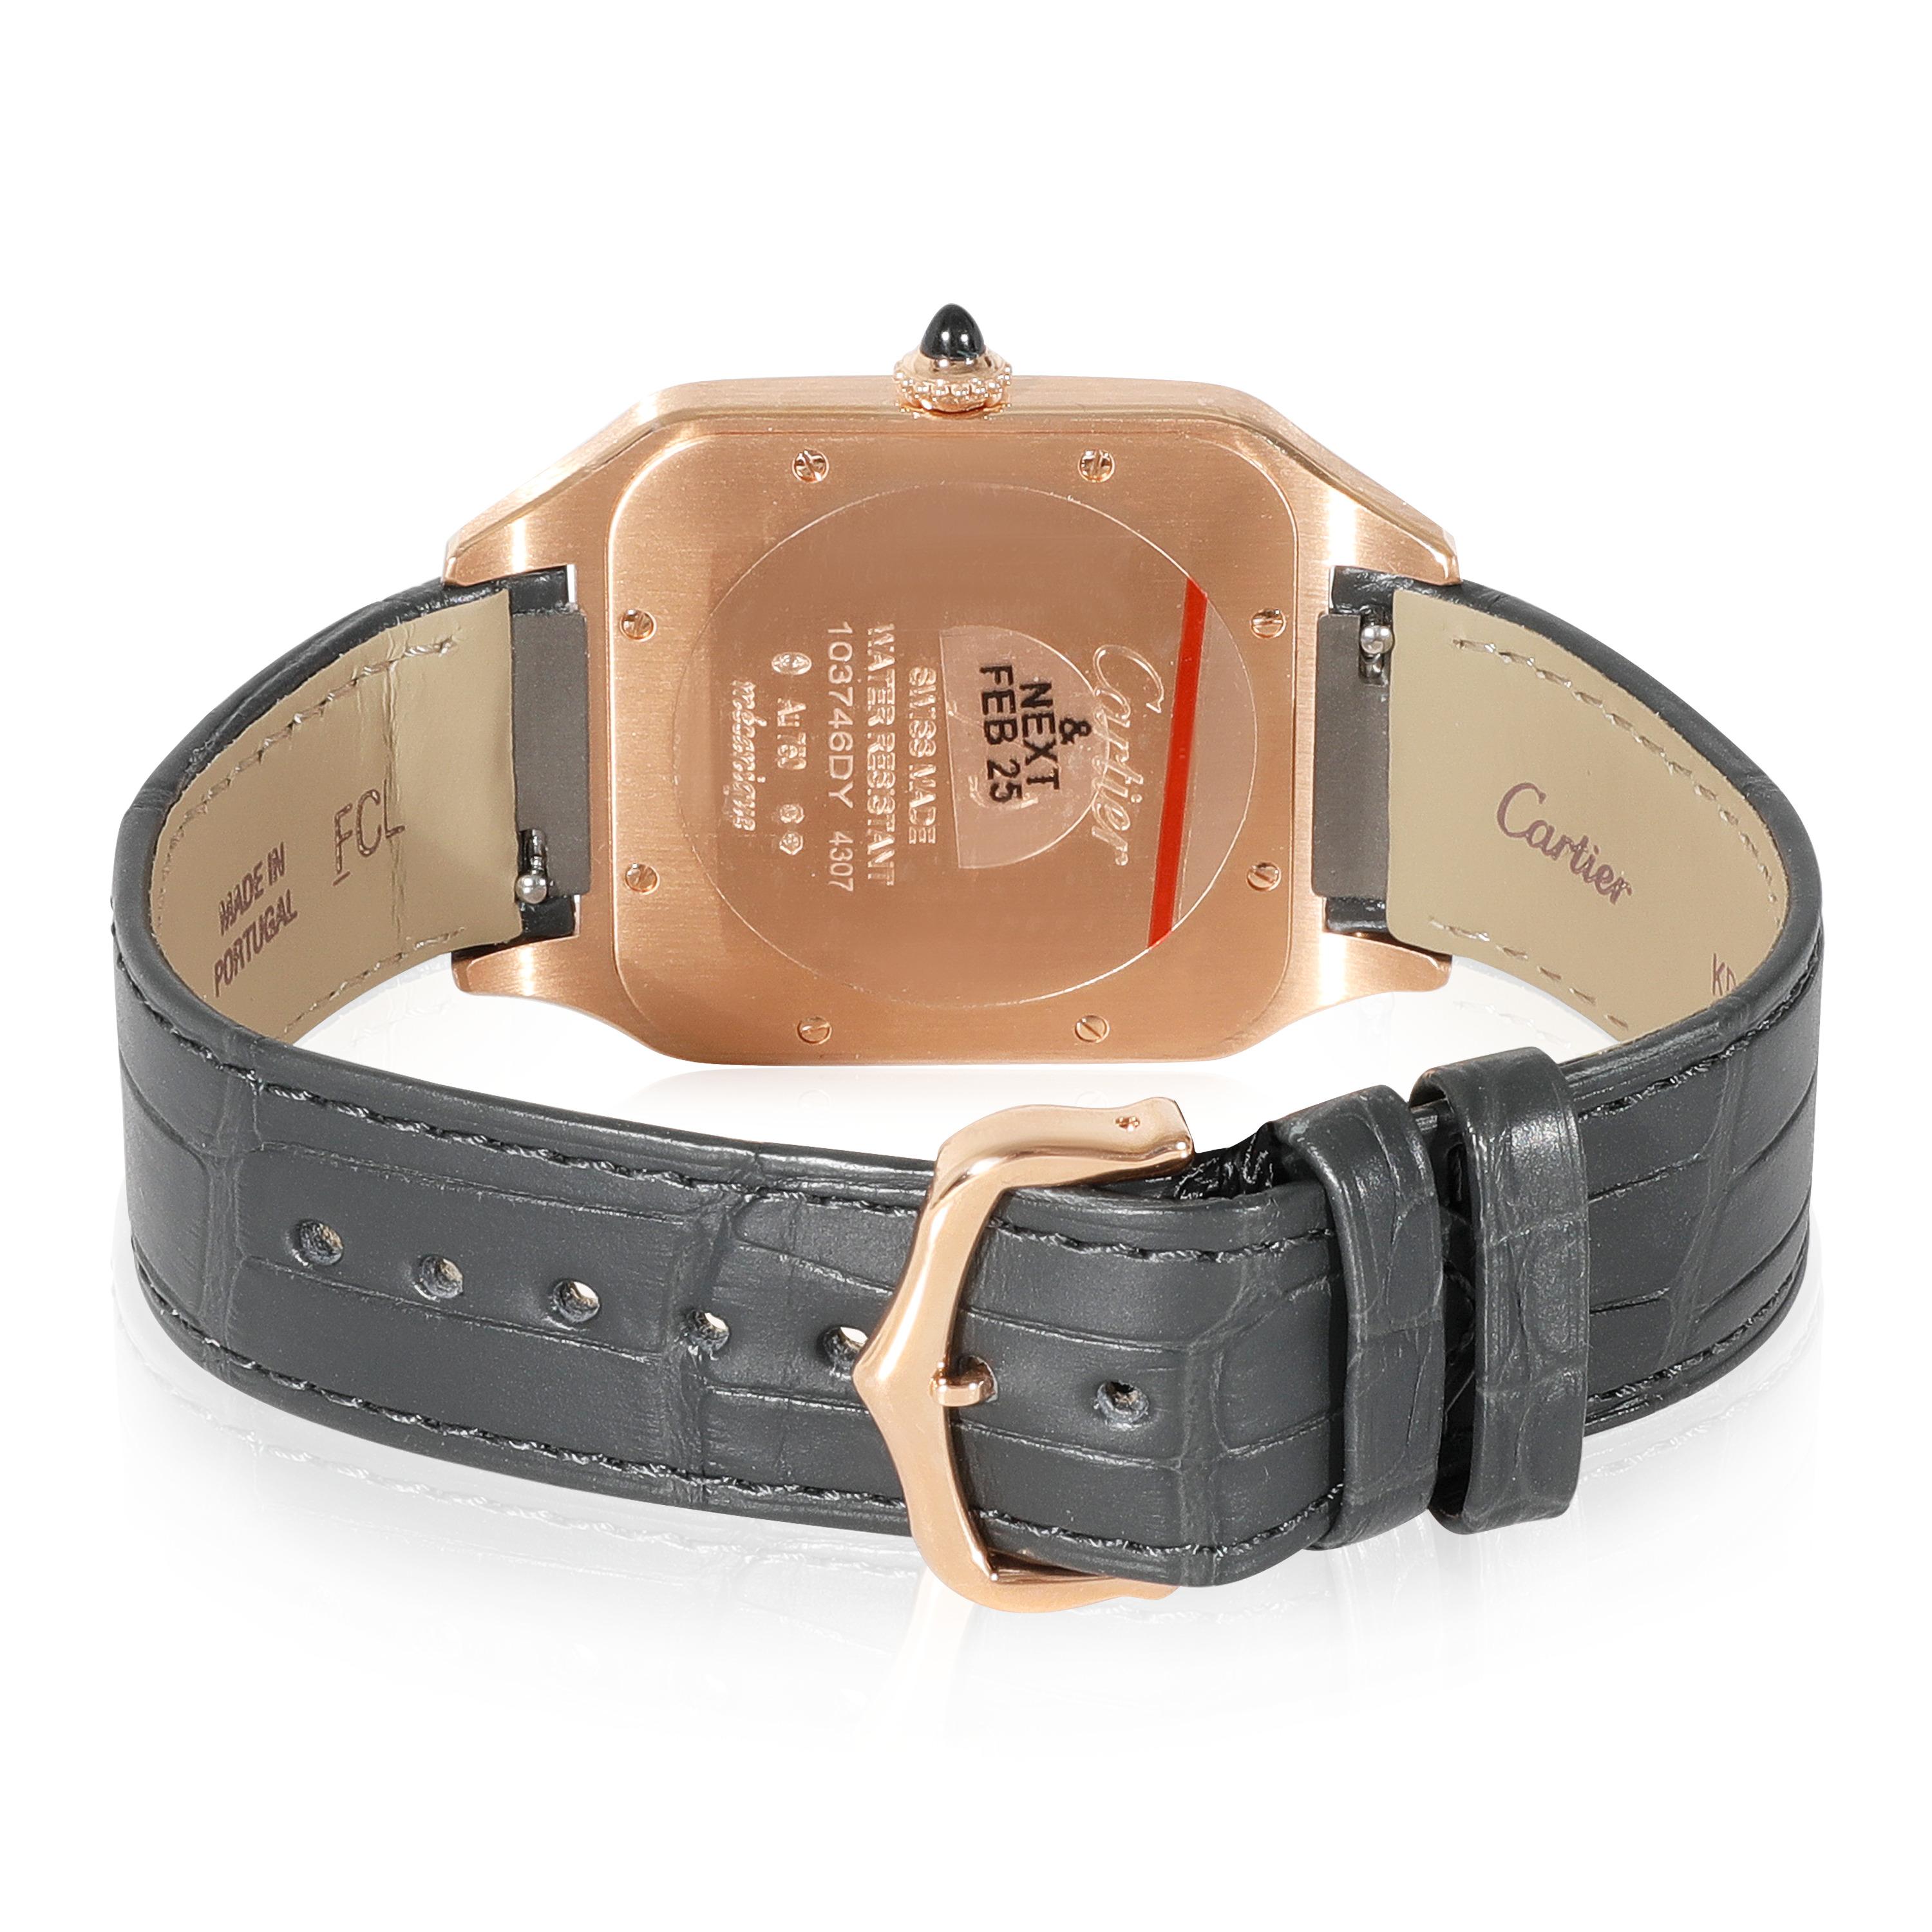 Cartier Tortue WA503751 Women's Watch in 18kt Rose Gold

SKU: 129073

PRIMARY DETAILS
Brand: Cartier
Model: Tortue
Country of Origin: Switzerland
Movement Type: Mechanical: Hand-winding
Year of Manufacture: 2010-2019
Condition: Retail price 29995